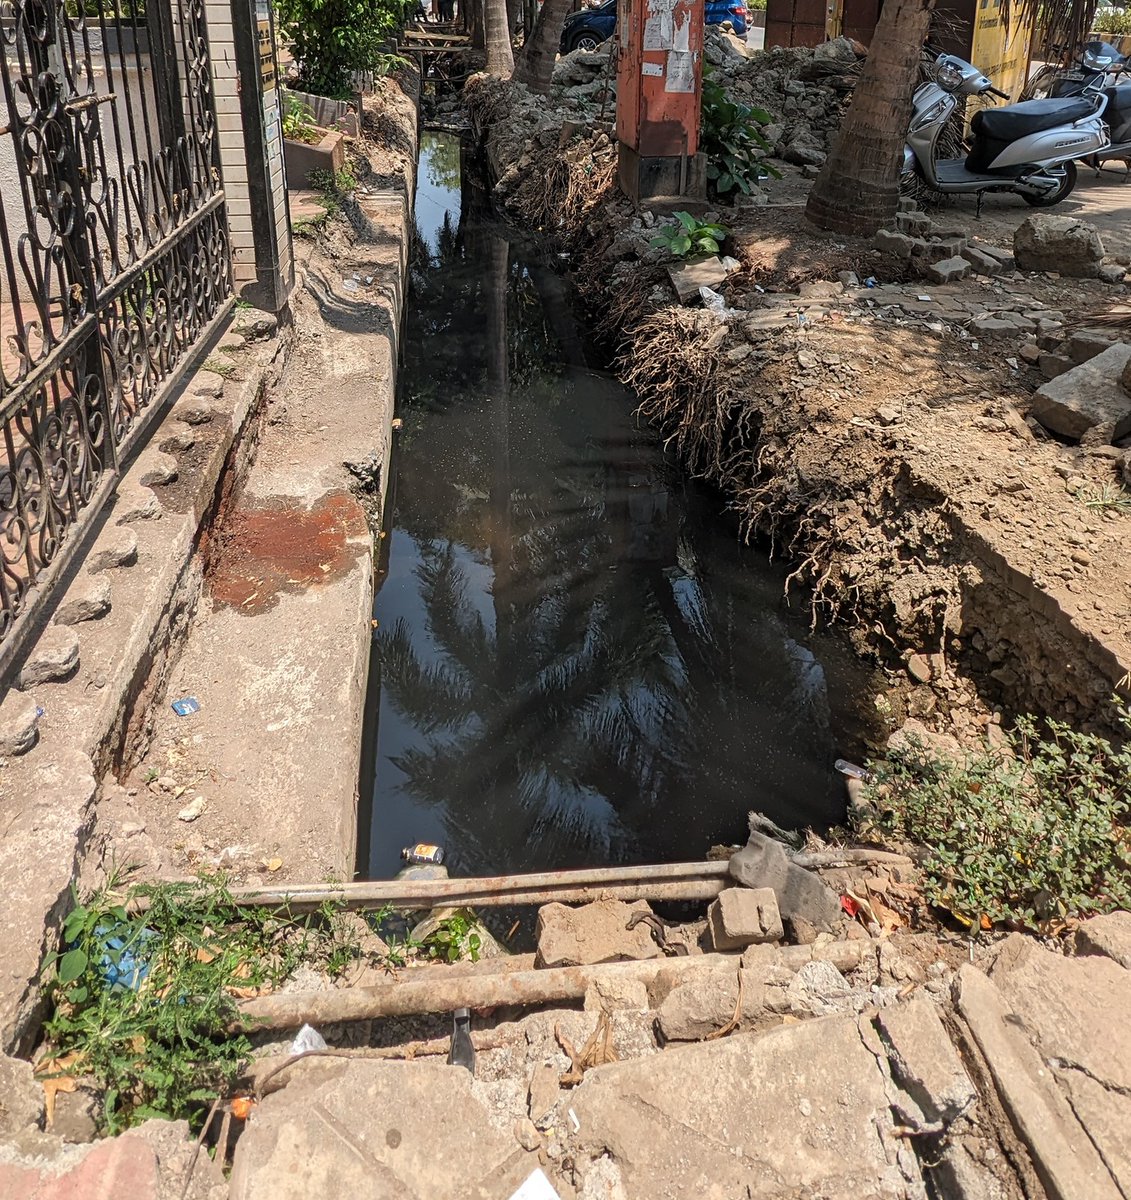 Mosquito Outbreak around Charkop Sector 8, Kandivali West, Mumbai due to stormwater drain  reconstruction work on halt since a month and smelly waterlogging. No response from @mybmc as they are all busy in election duties. Help Save Mumbaikar 
@mybmc @CMOMaharashtra